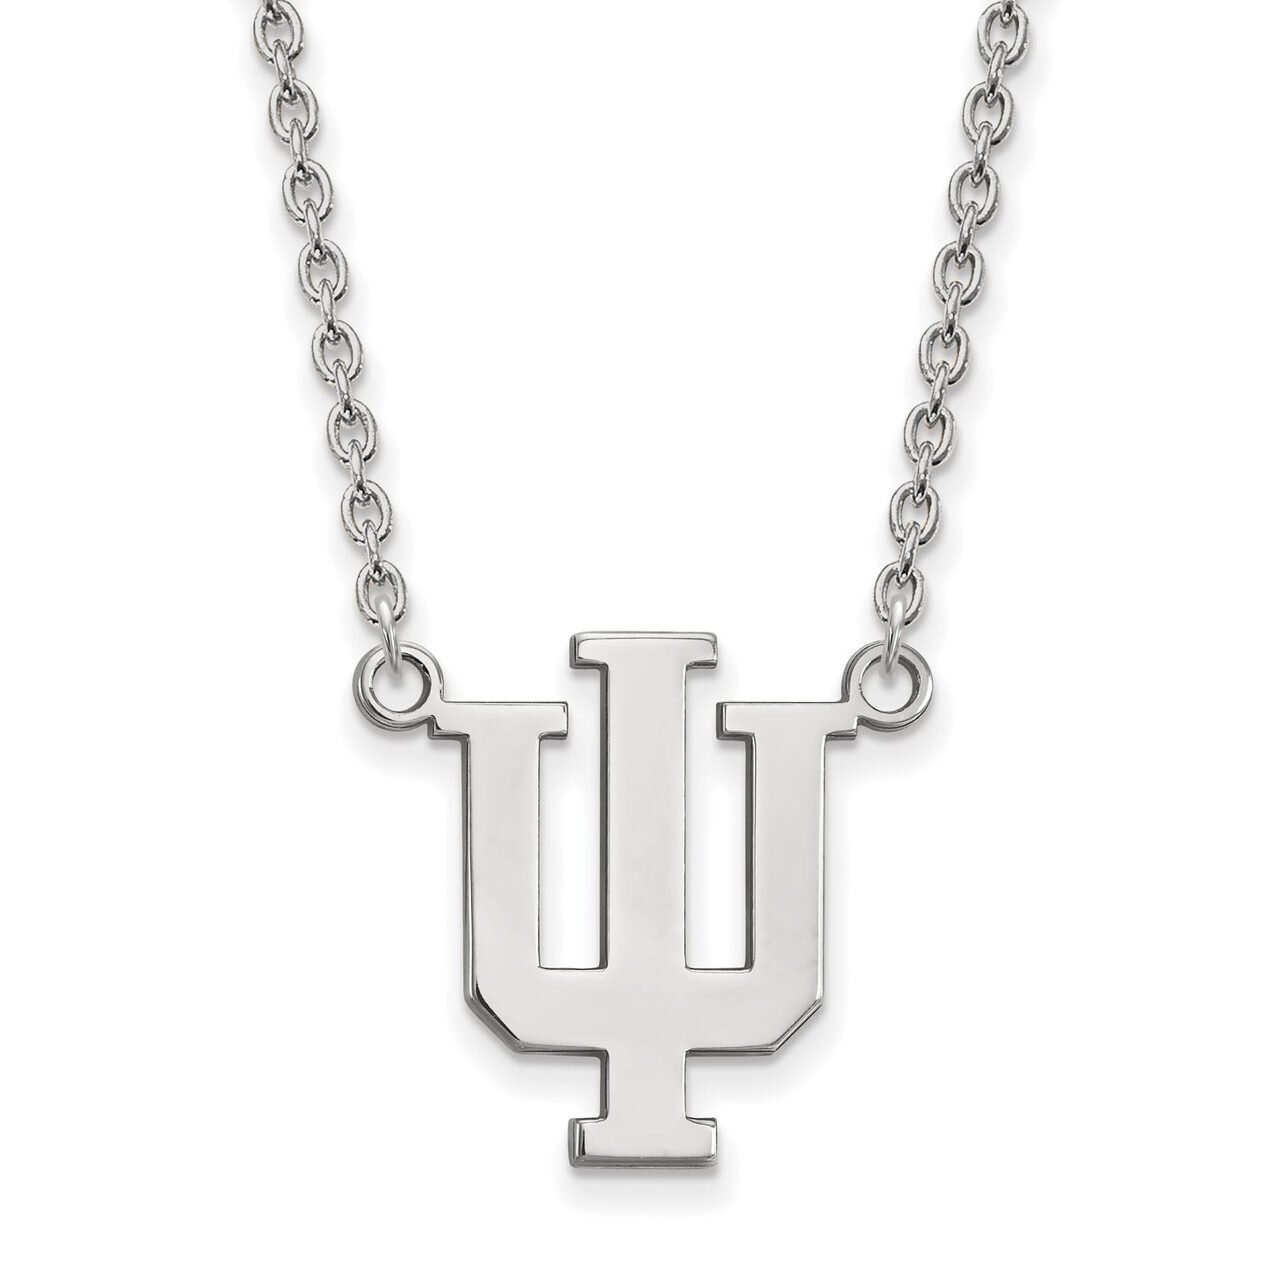 Indiana University Large Pendant with Chain Necklace 10k White Gold 1W016IU-18